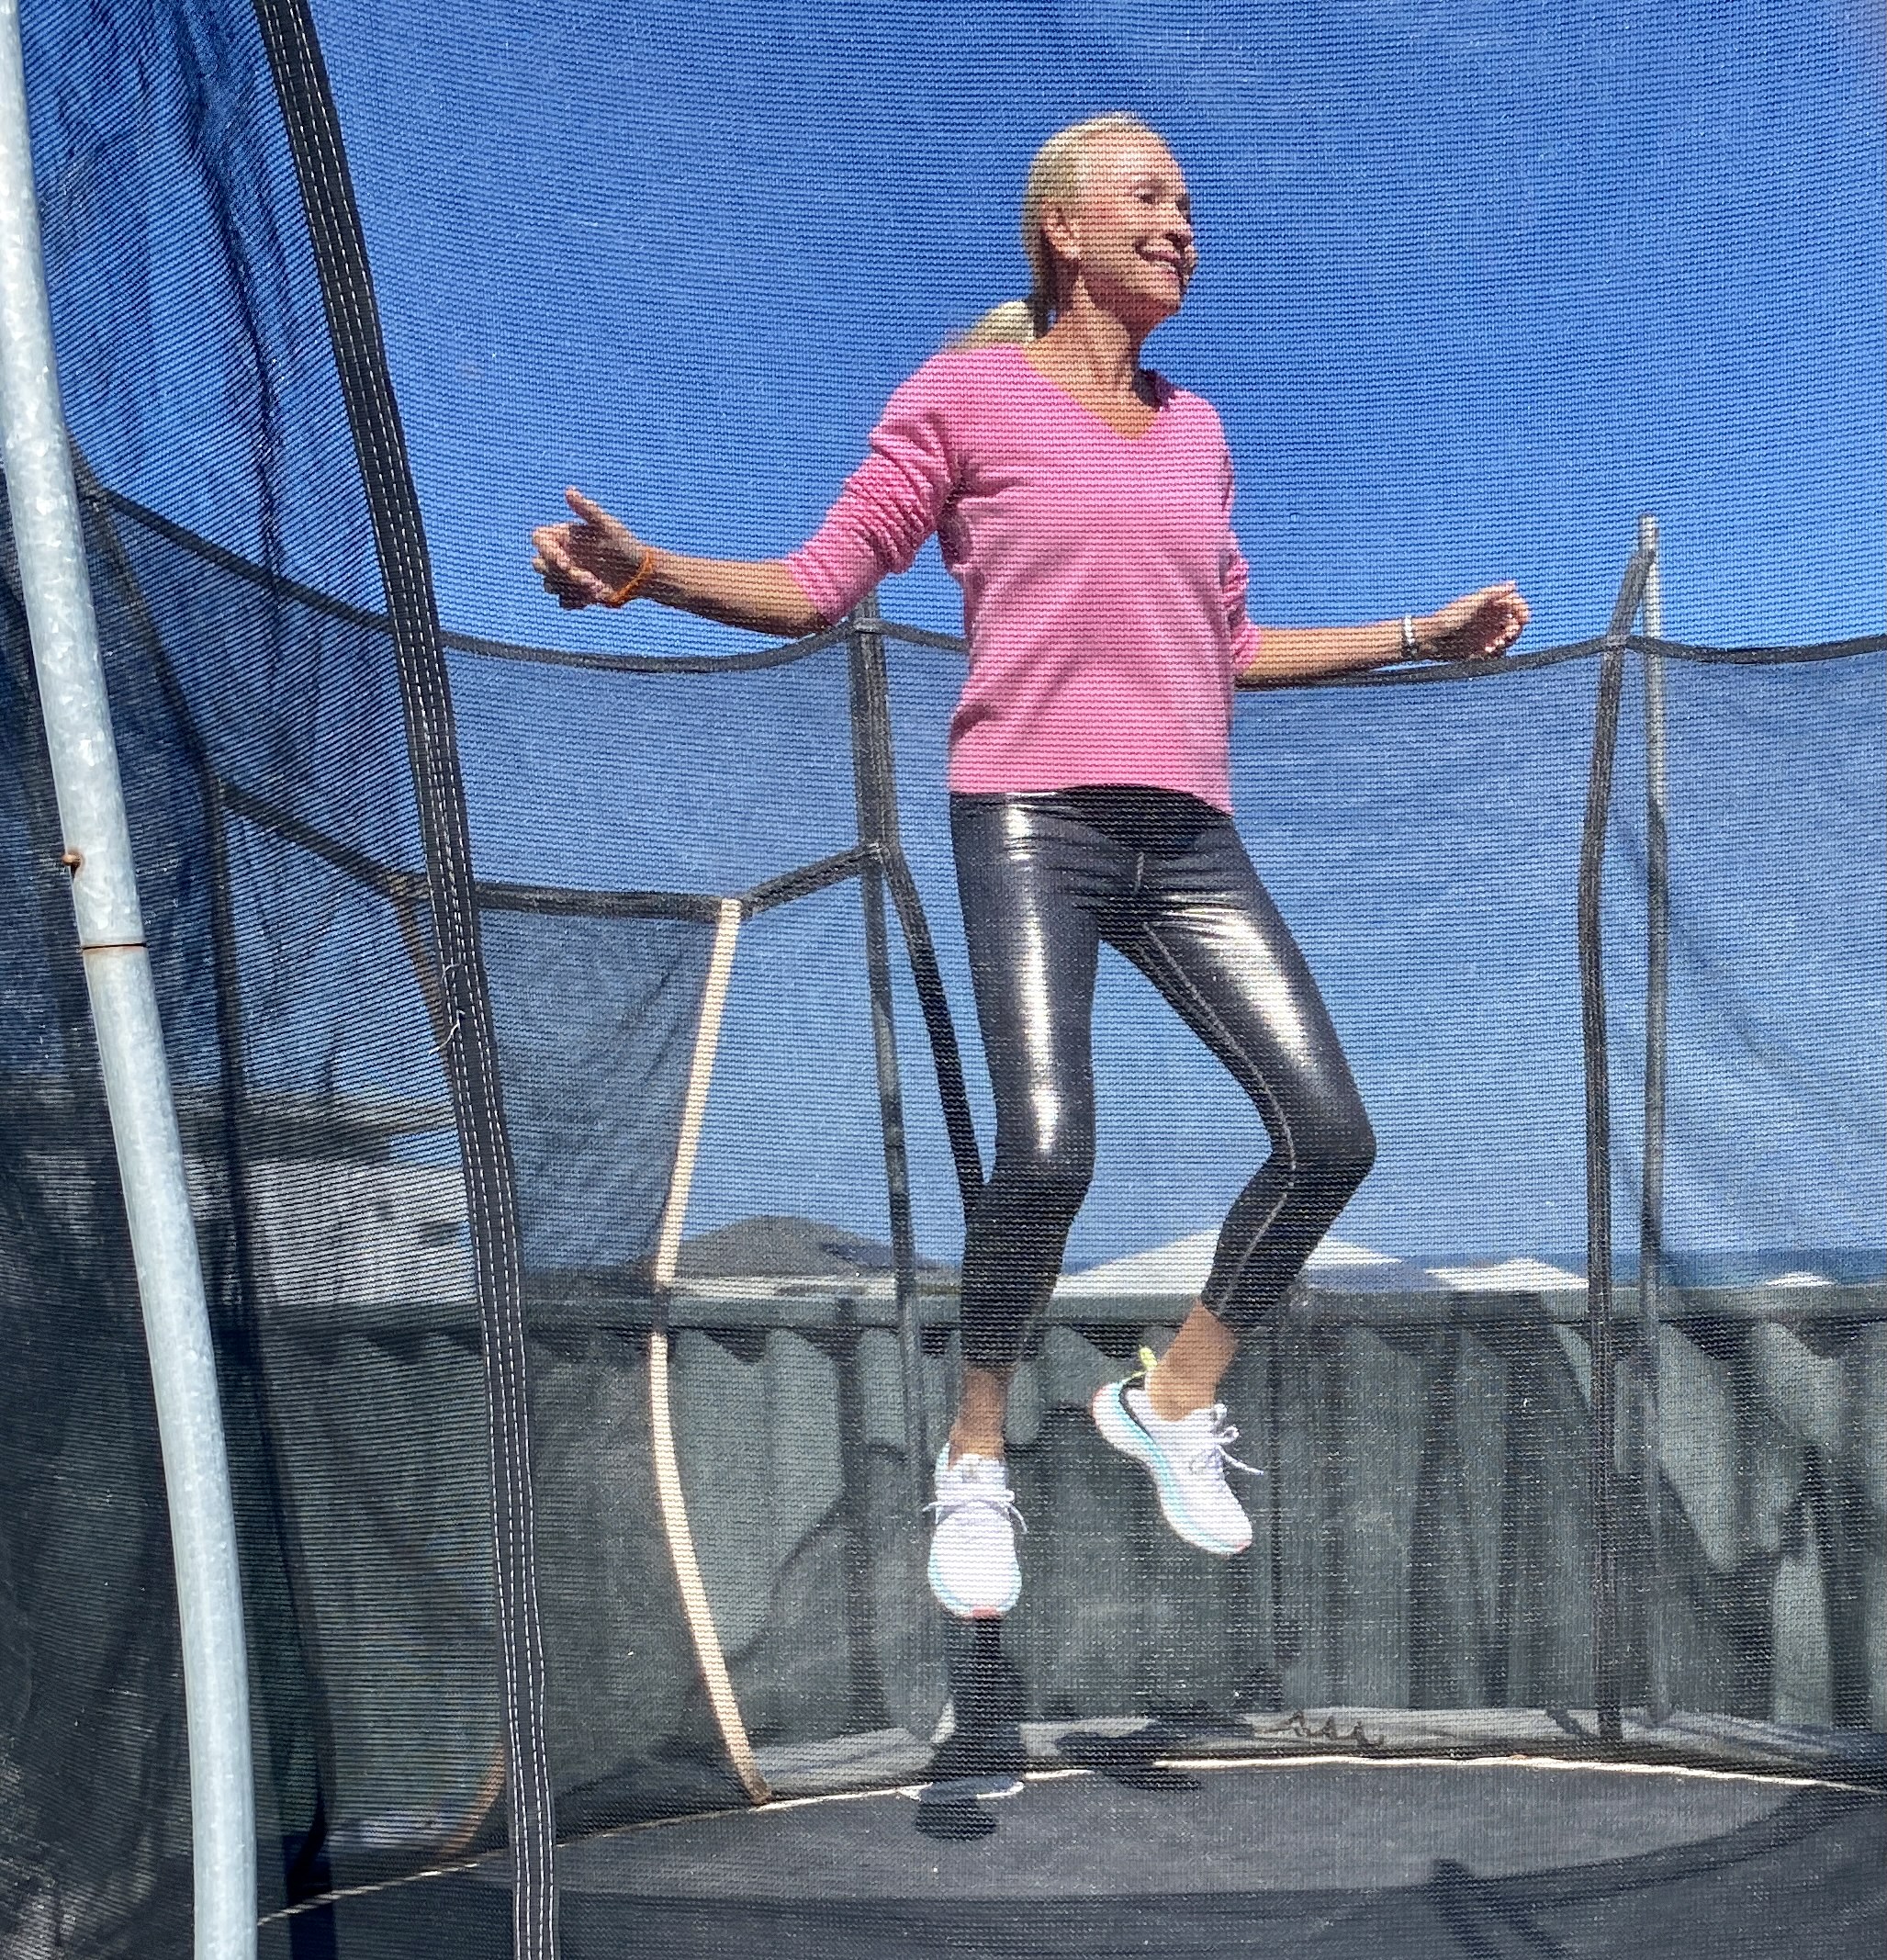 What is a biohacker? Verne rebounding on a trampoline